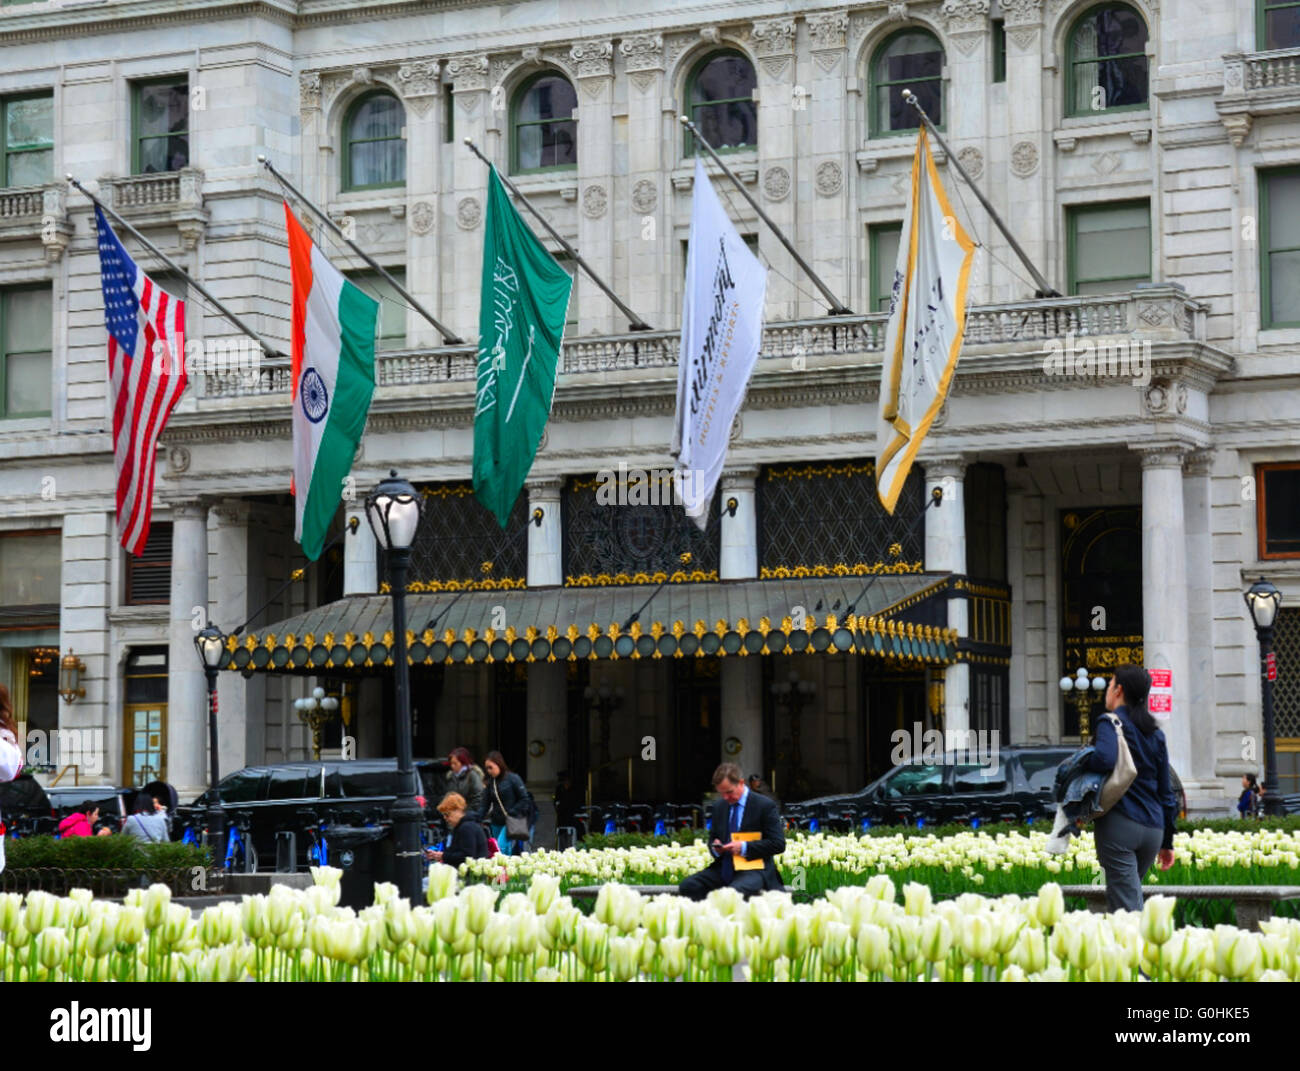 The 5th Avenue entrance to the Plaza Hotel, NYC,USA Stock Photo